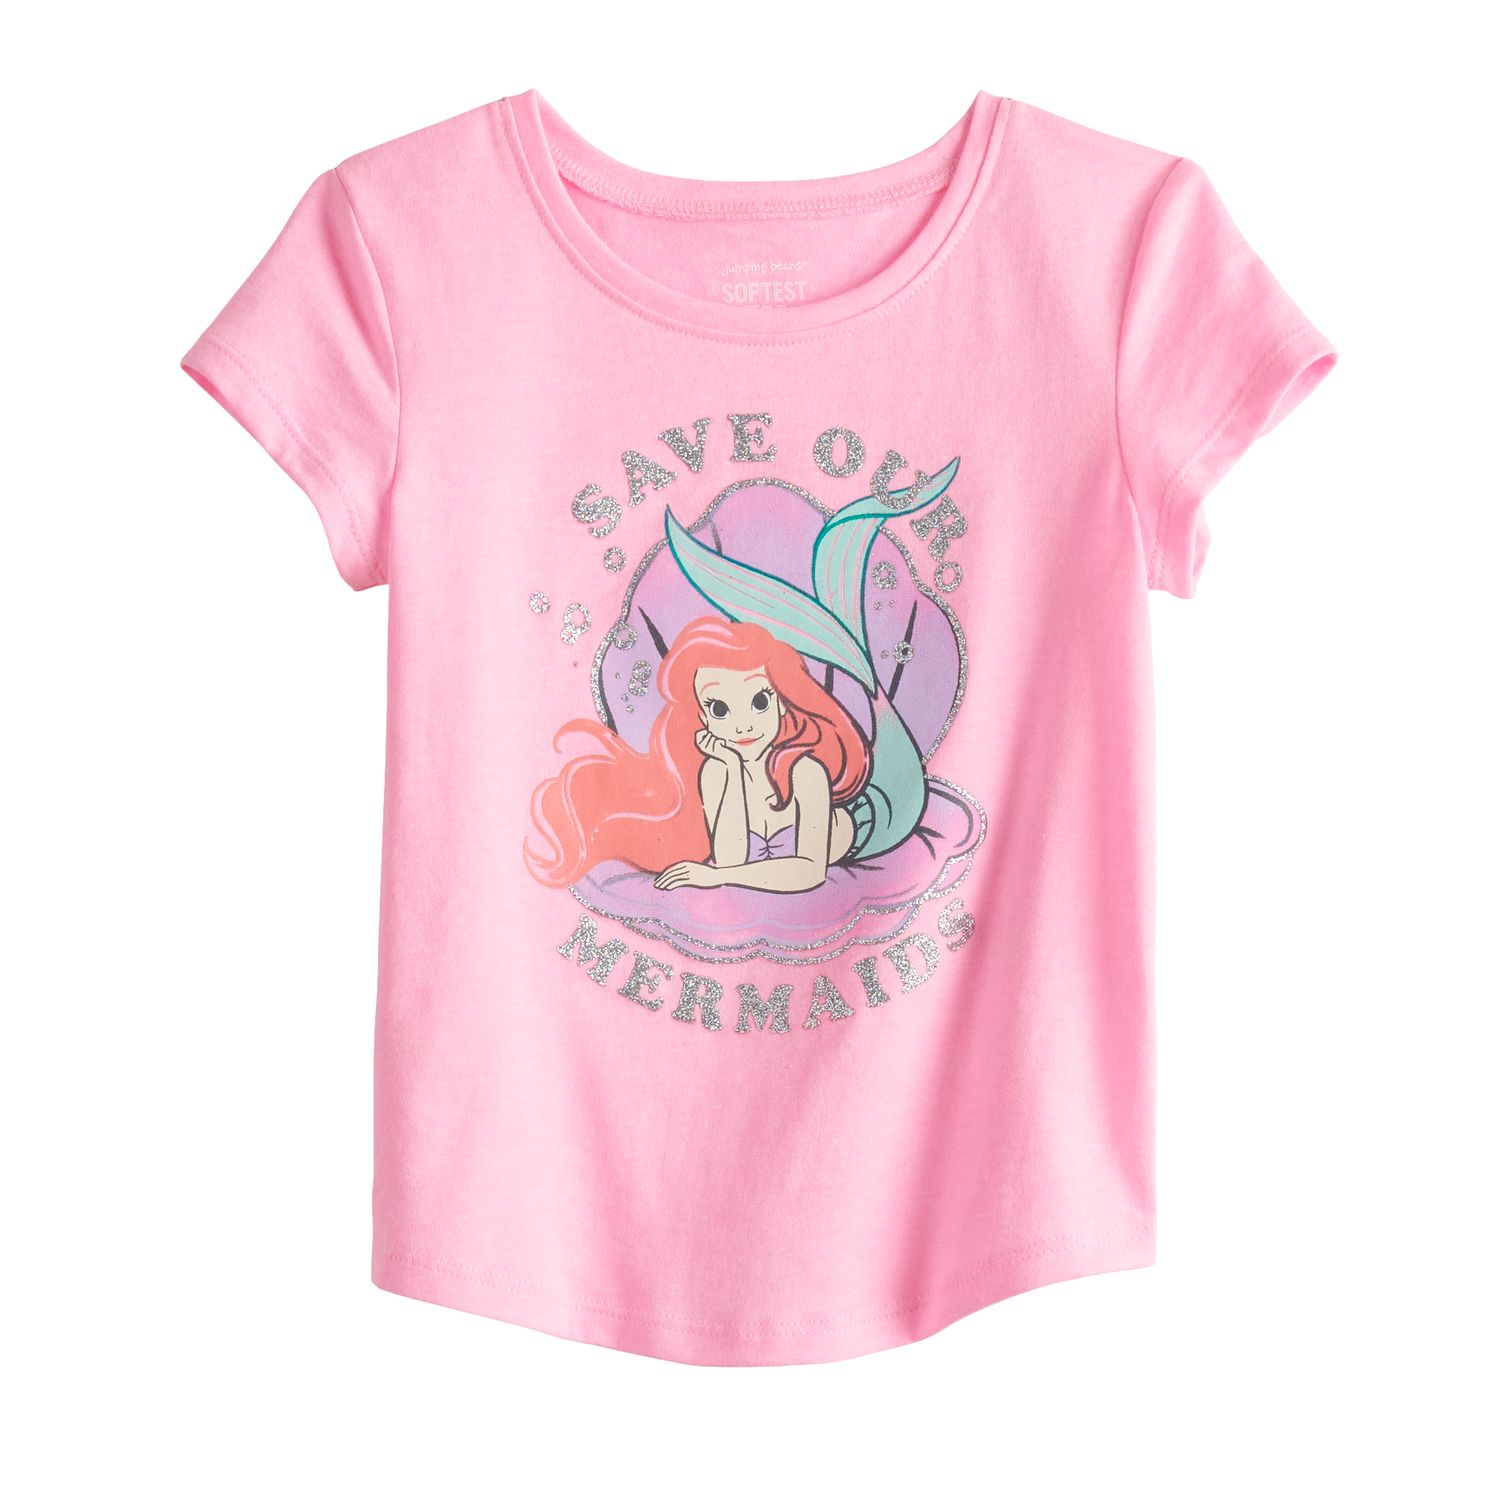 Image for Disney/Jumping Beans Disney's The Little Mermaid Ariel Toddler Girl Core Tee by Jumping Beans® at Kohl's.